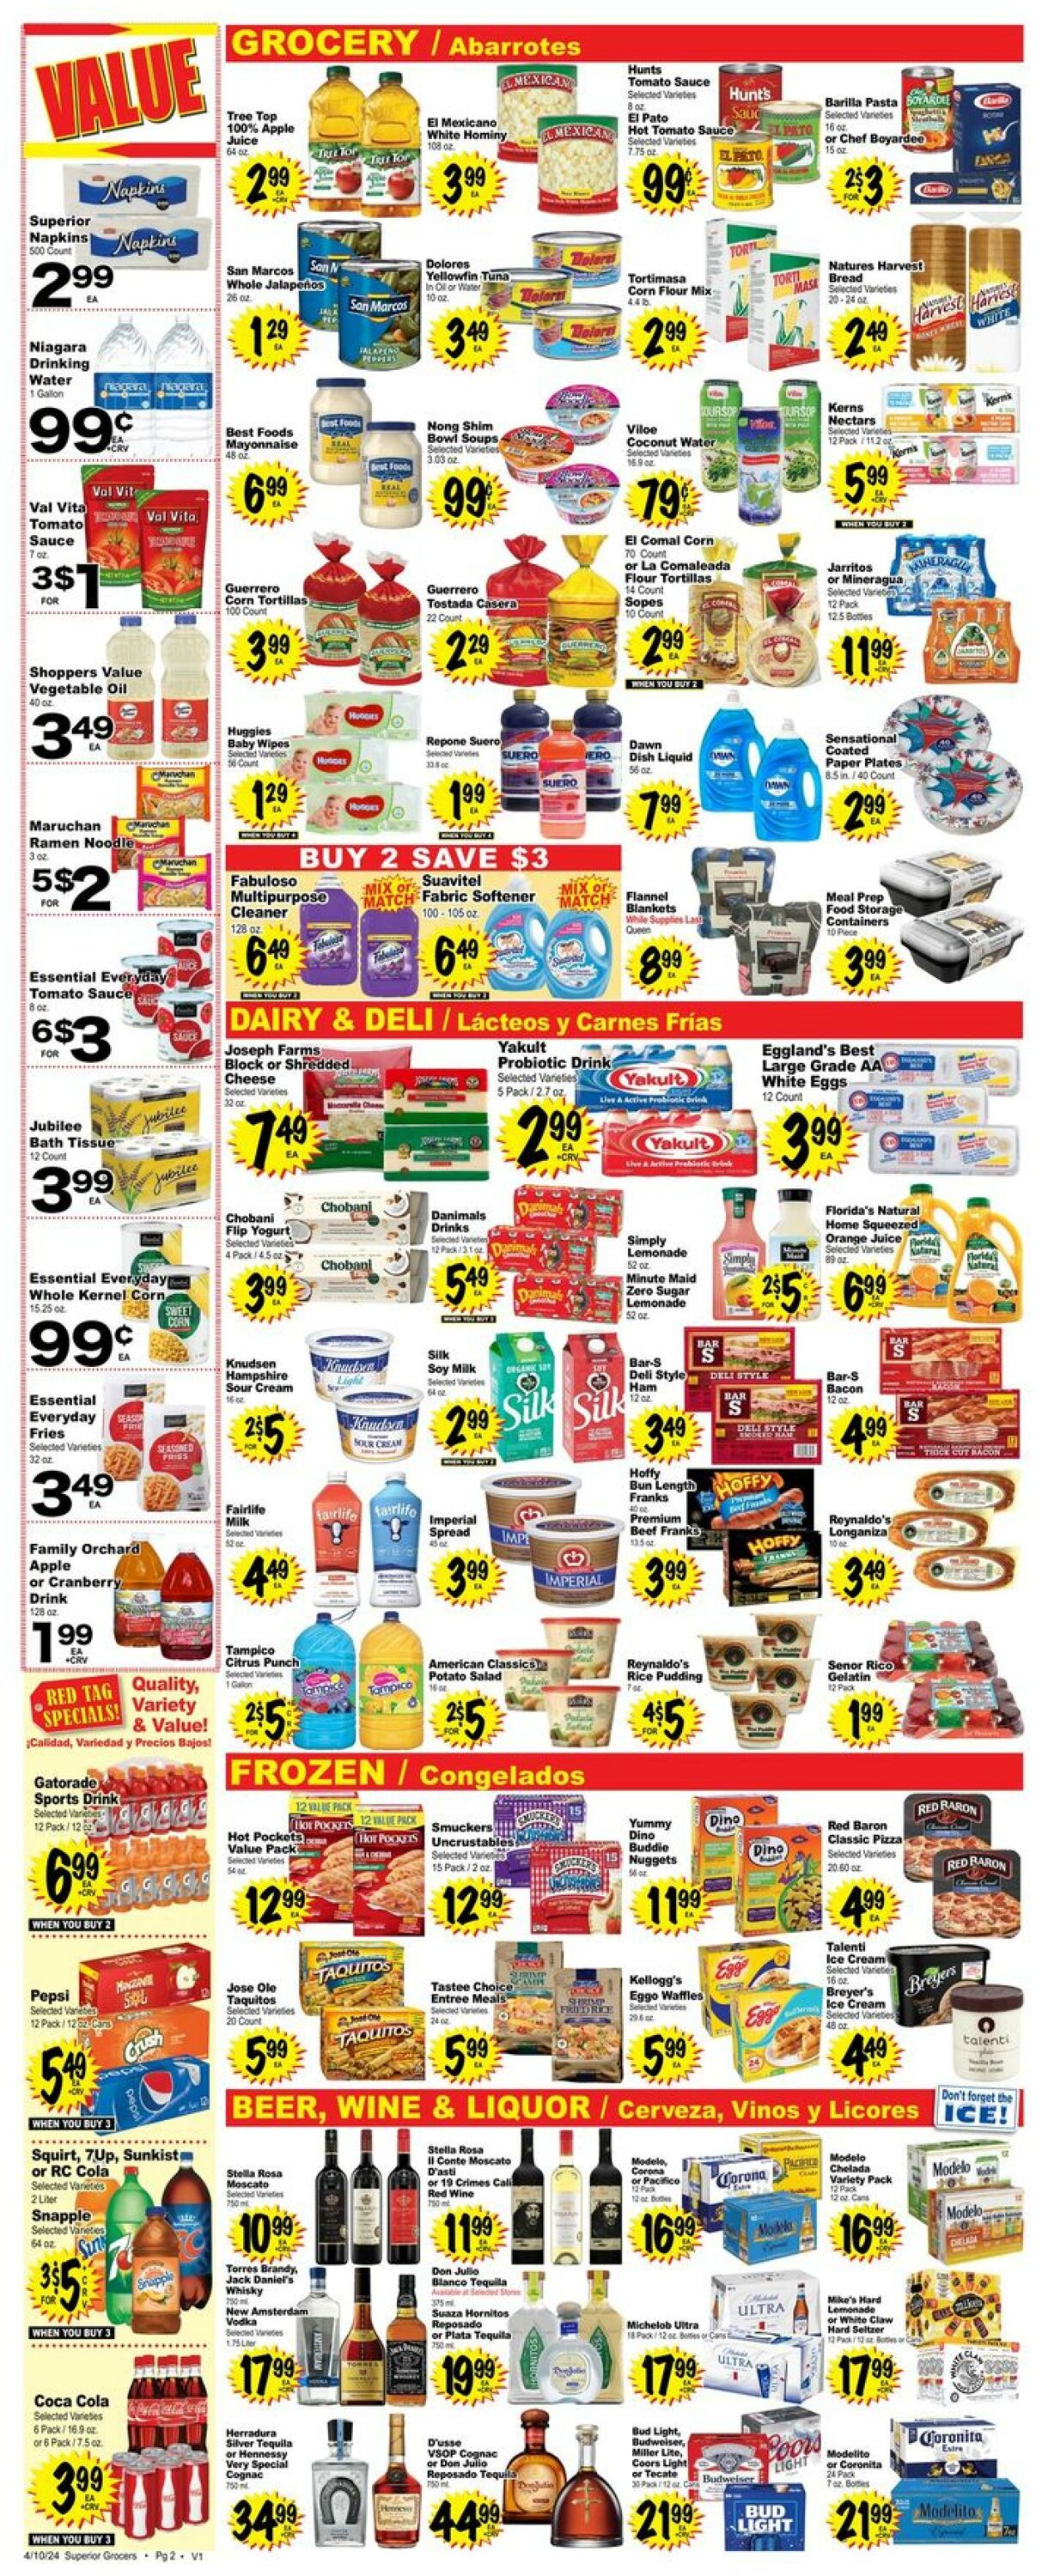 Weekly ad Superior Grocers 04/10/2024 - 04/16/2024